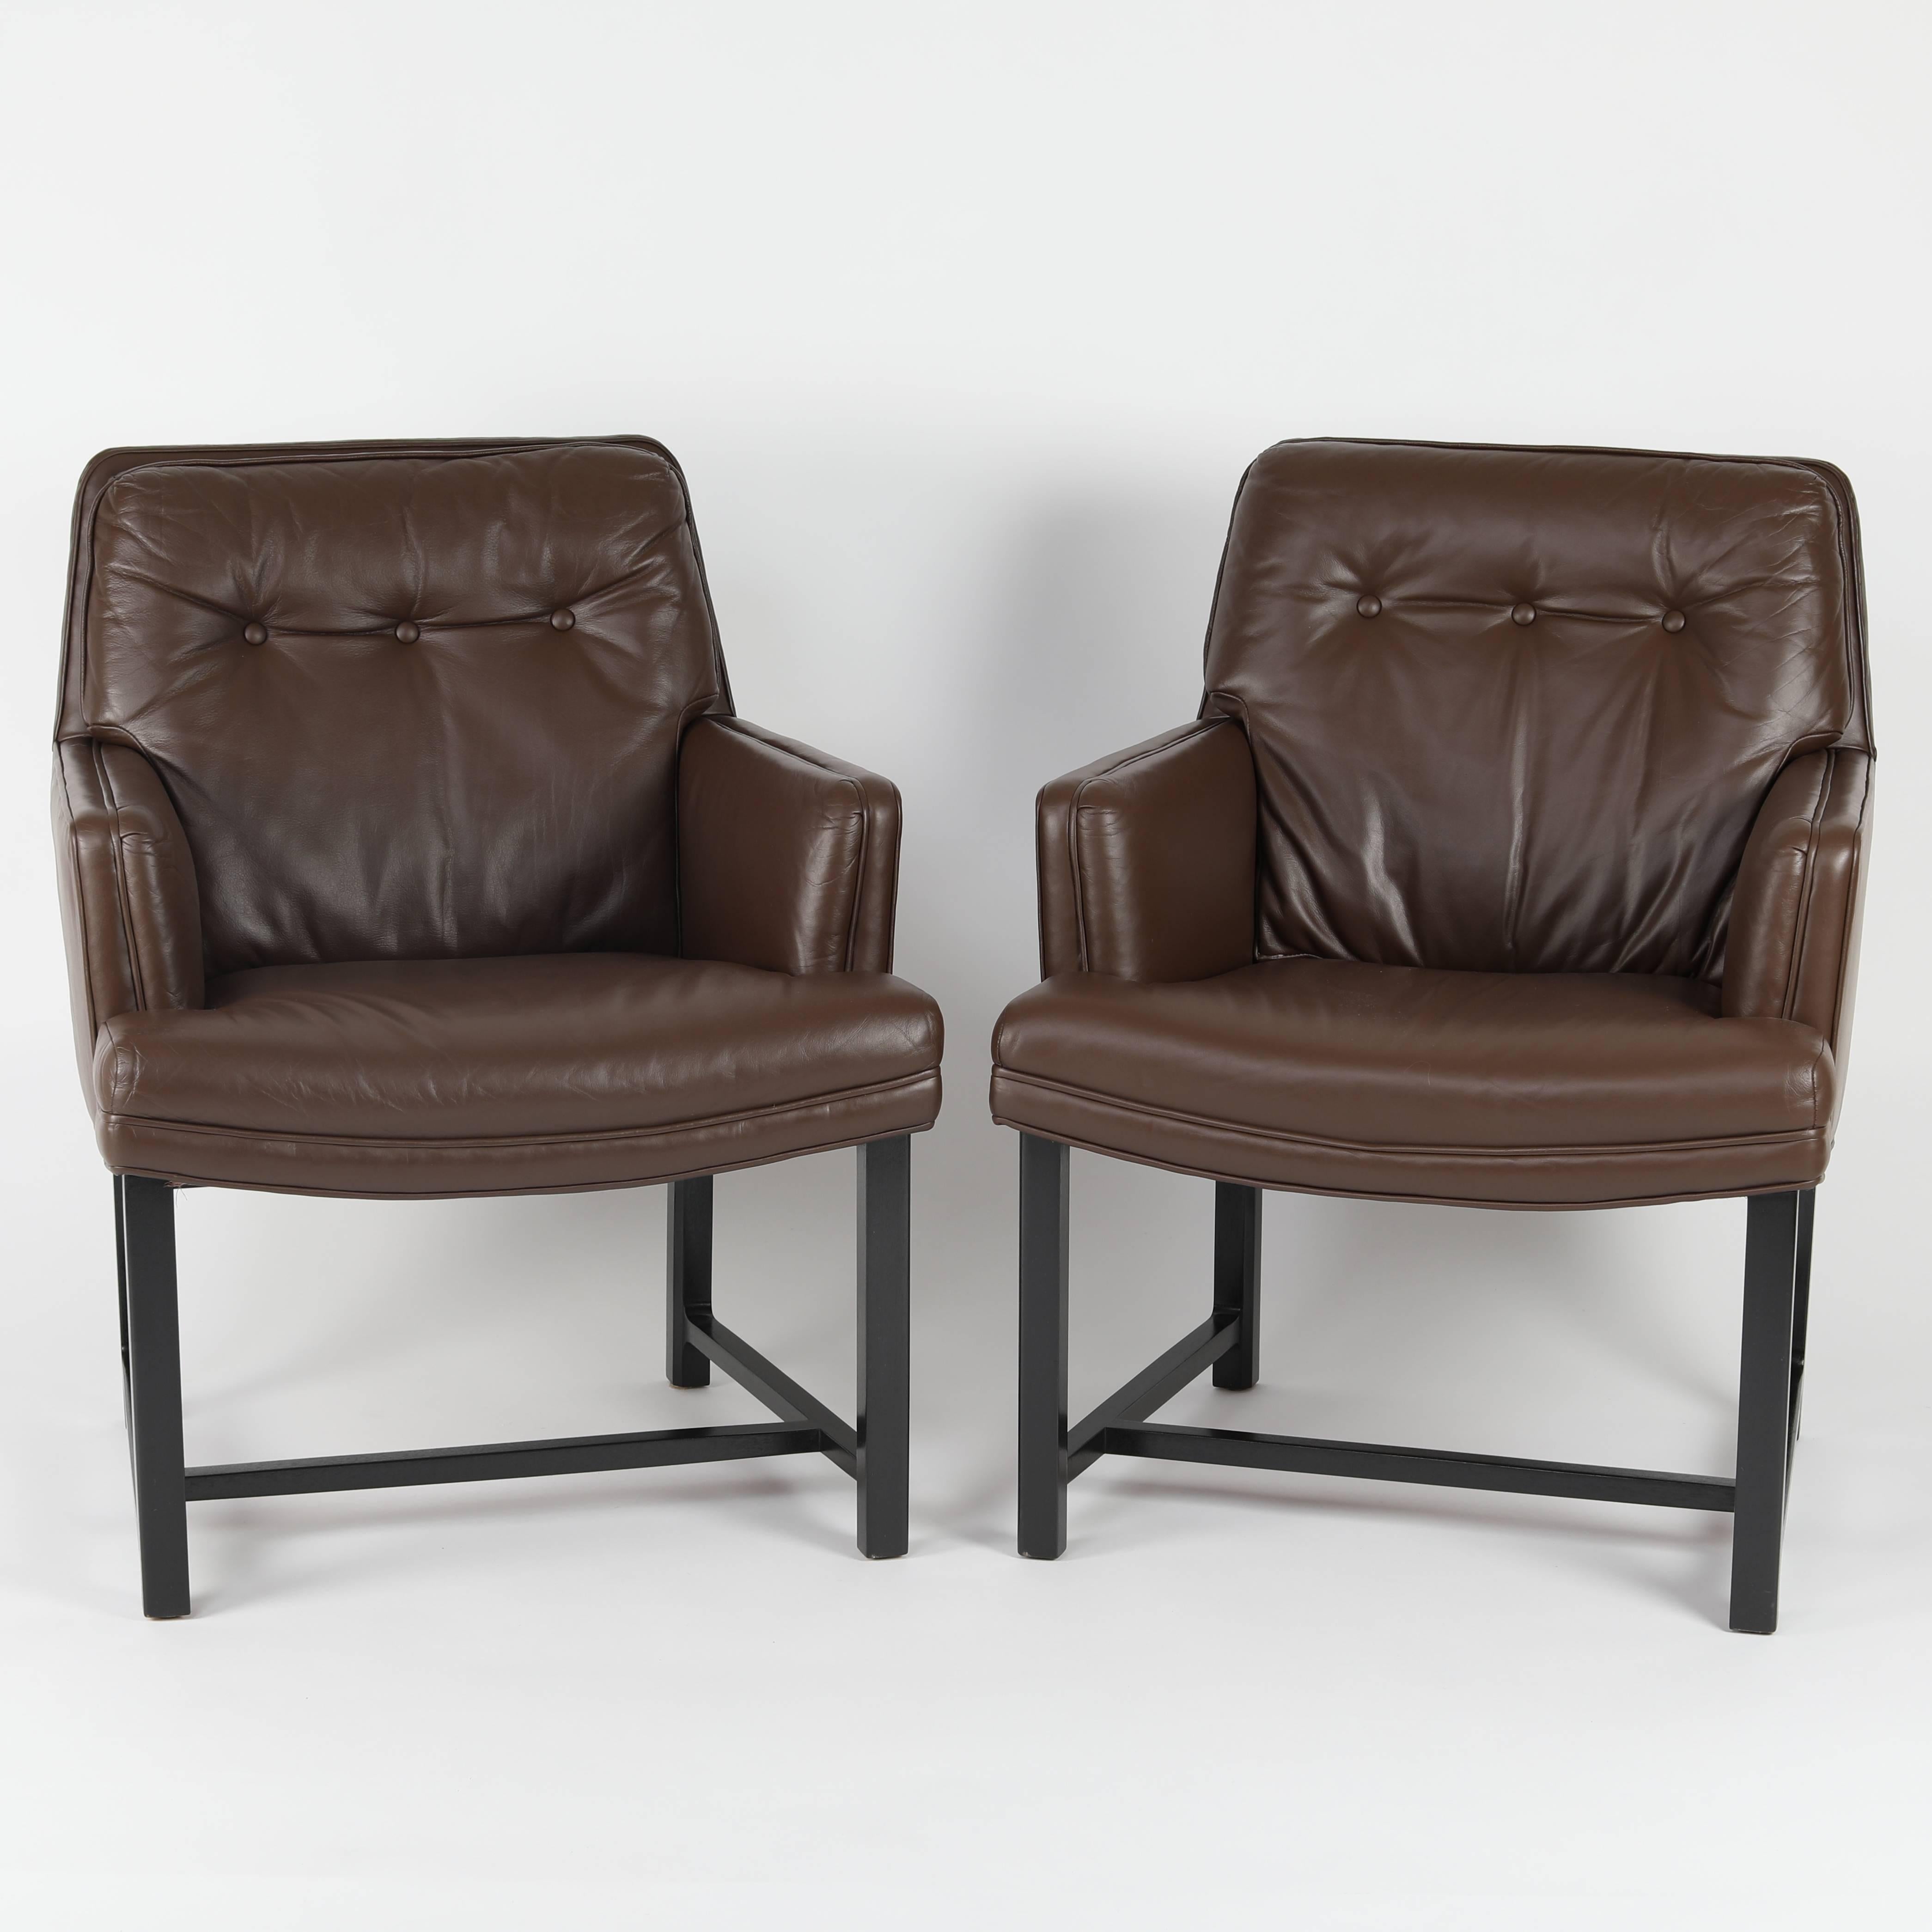 This fine pair of sturdy and versatile armchairs designed by Edward Wormley reflects Dunbar's signature high-quality construction. The wood frames have been professionally refinished and the original brown leather has been professionally restored.